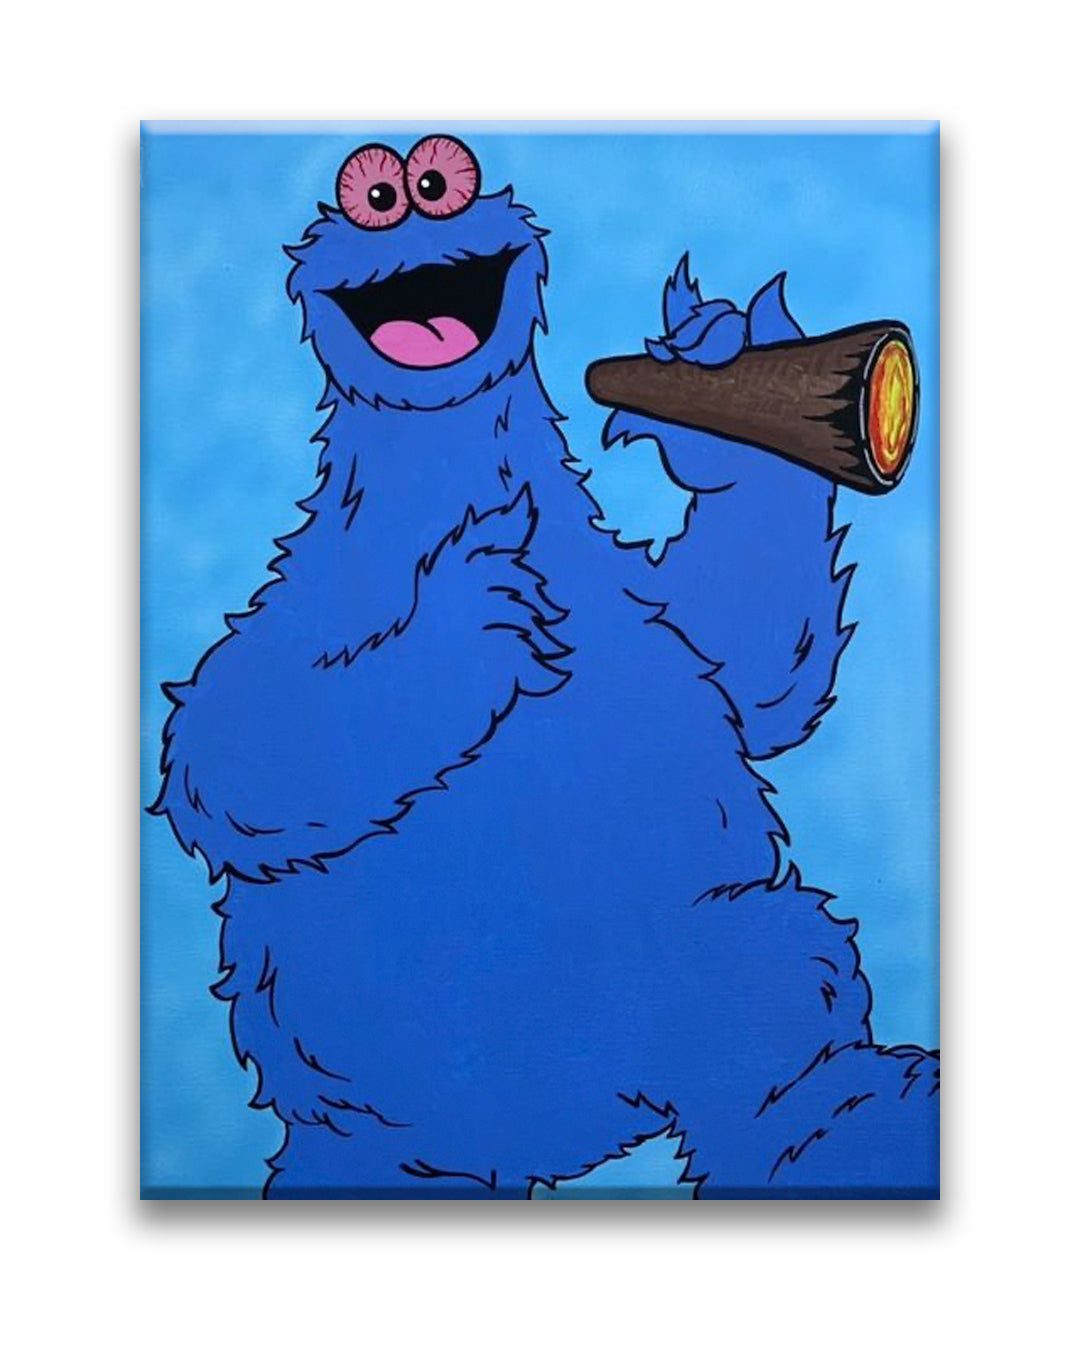 HeadyPaints - Cookie Monster